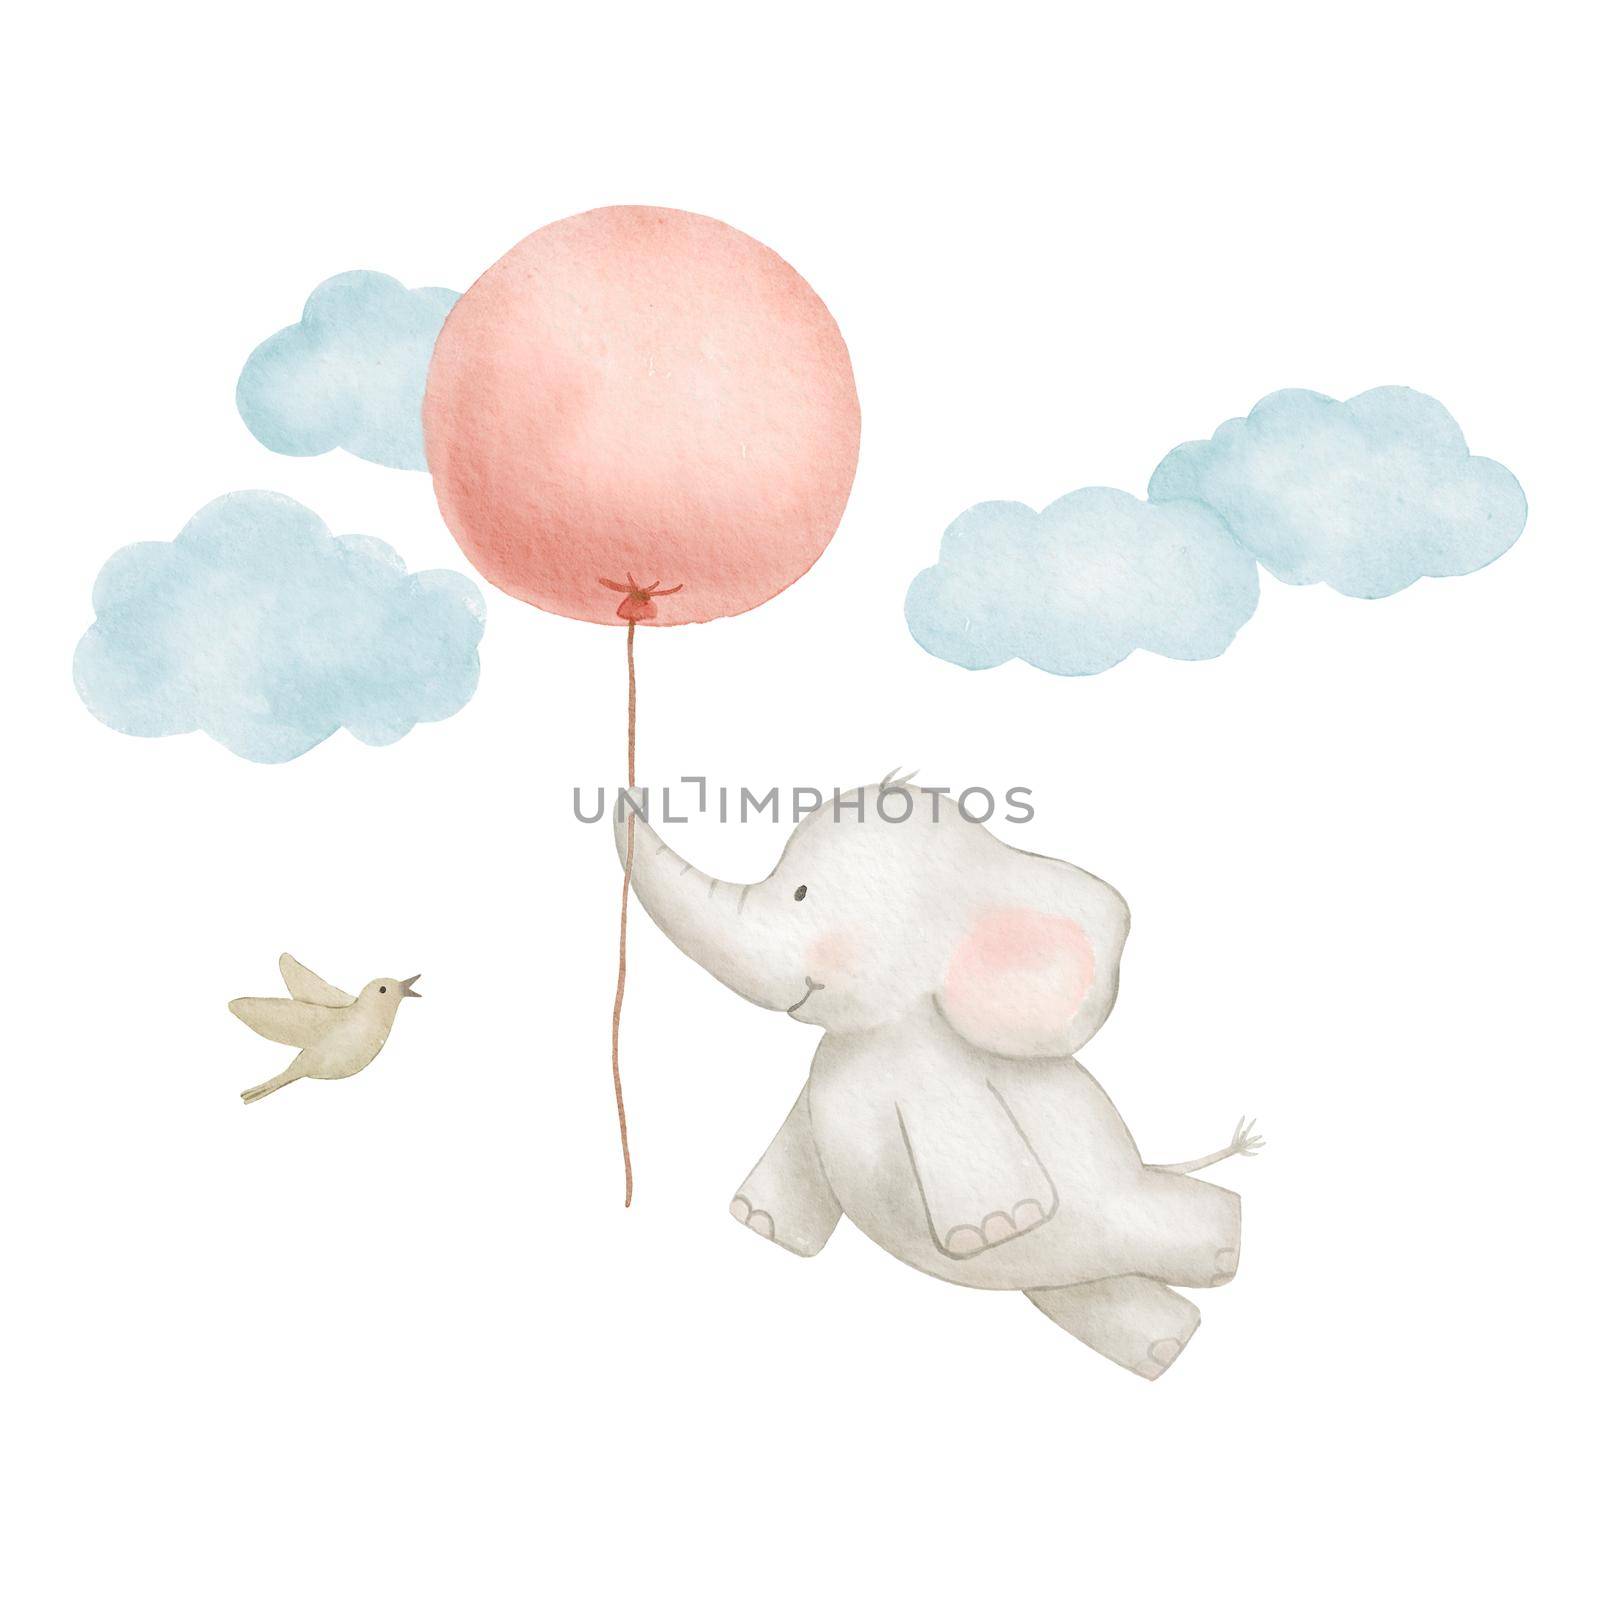 Bird and Cute baby elephant flying with red balloon in sky. Watercolor drawing isolated on white background for cards